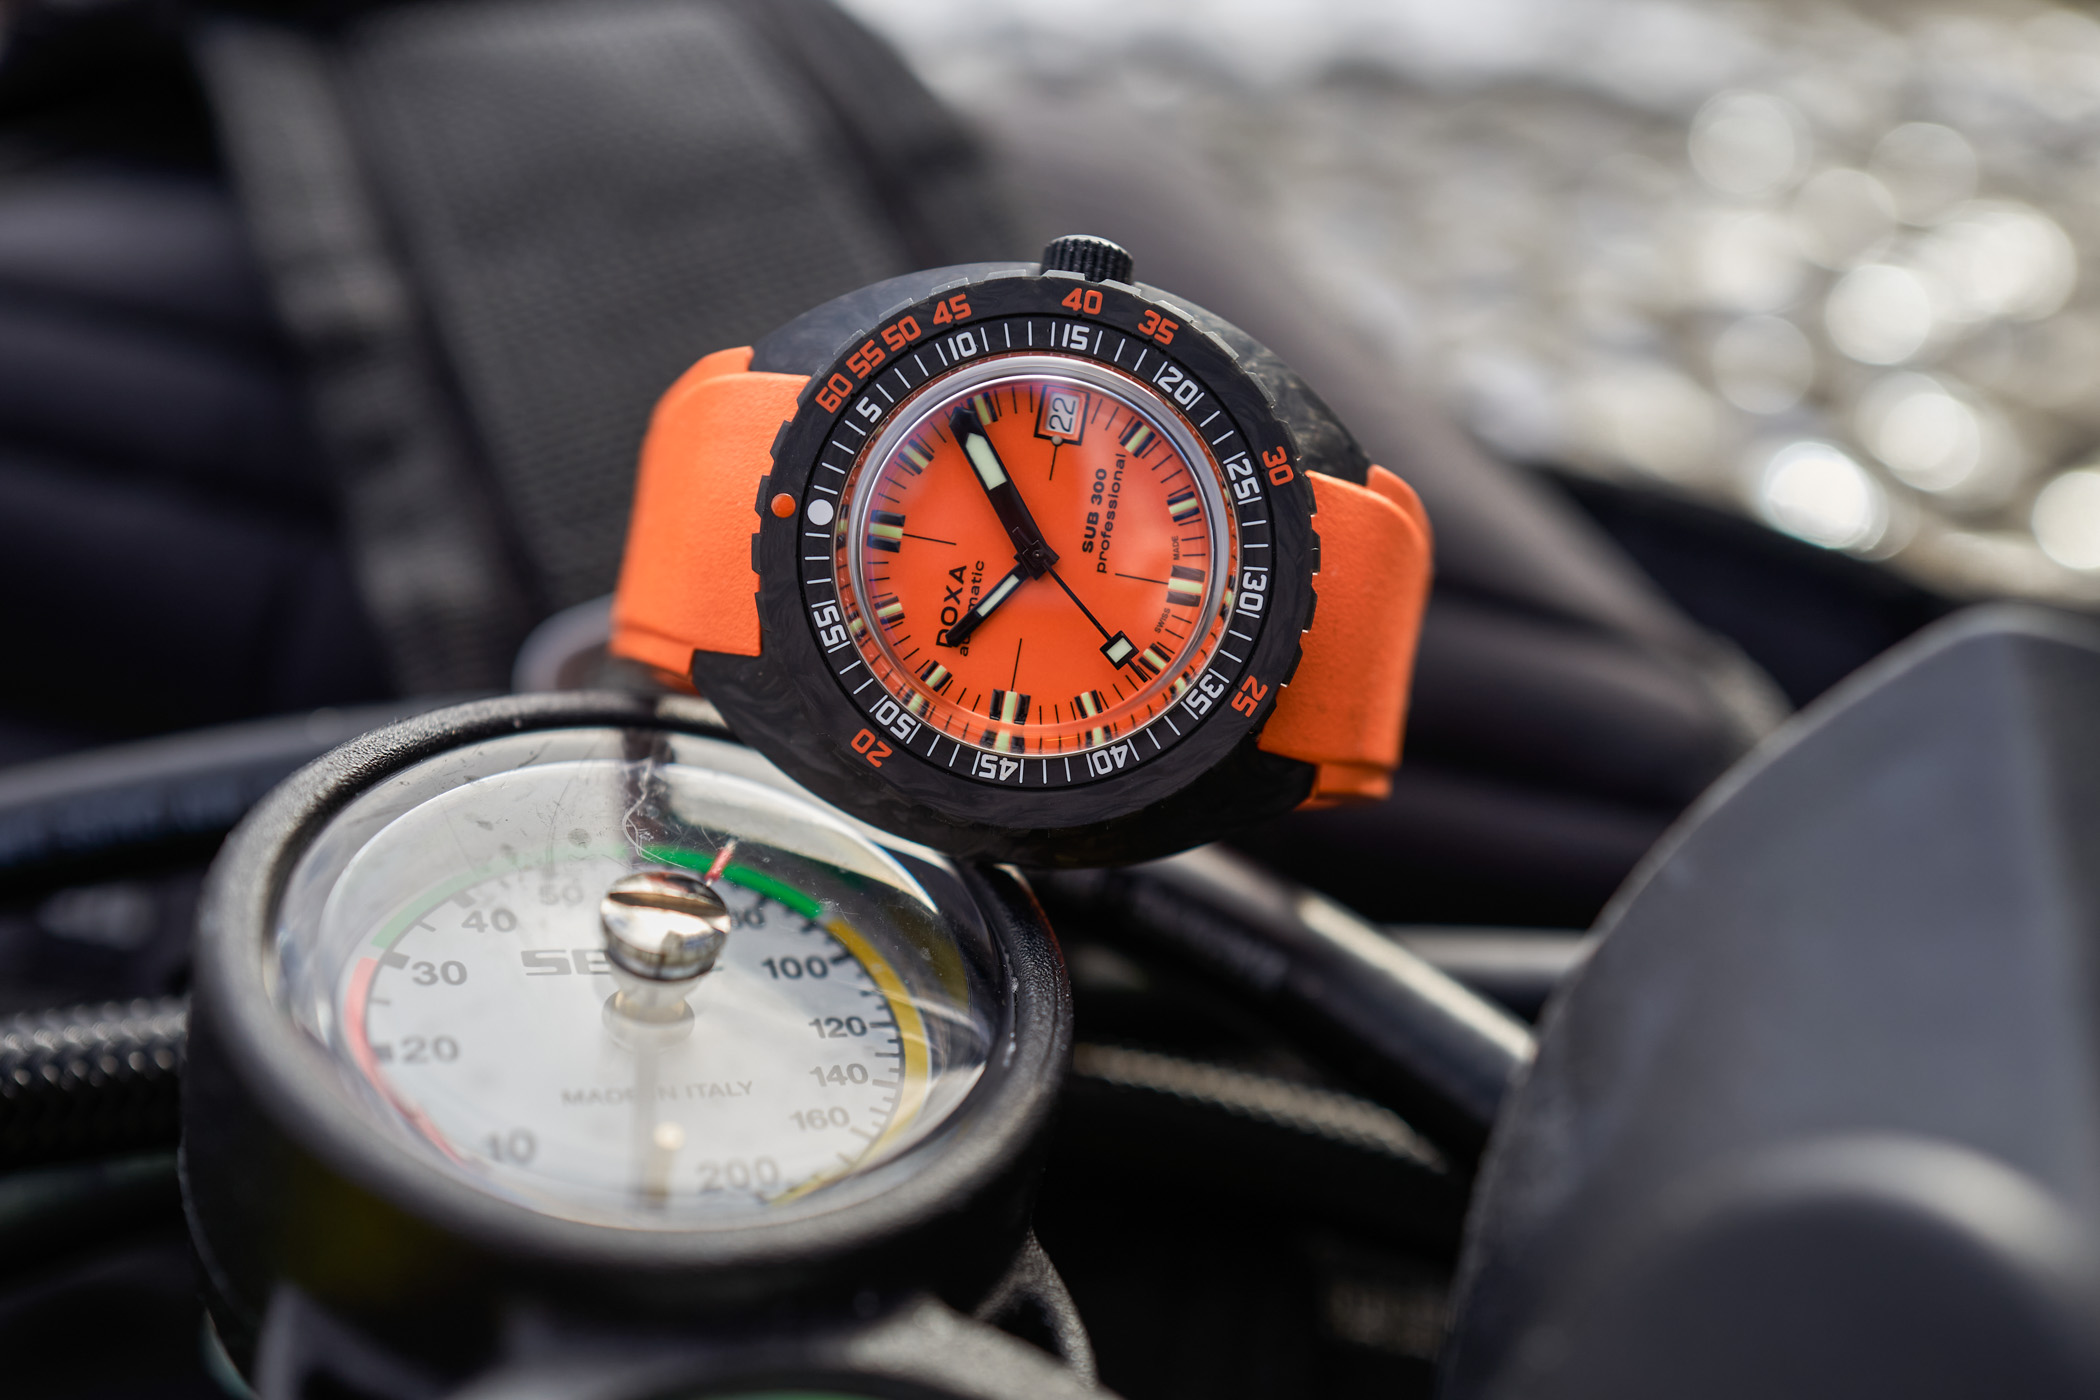 Doxa SUB 300 Carbon Professional Orange - Dive watch review